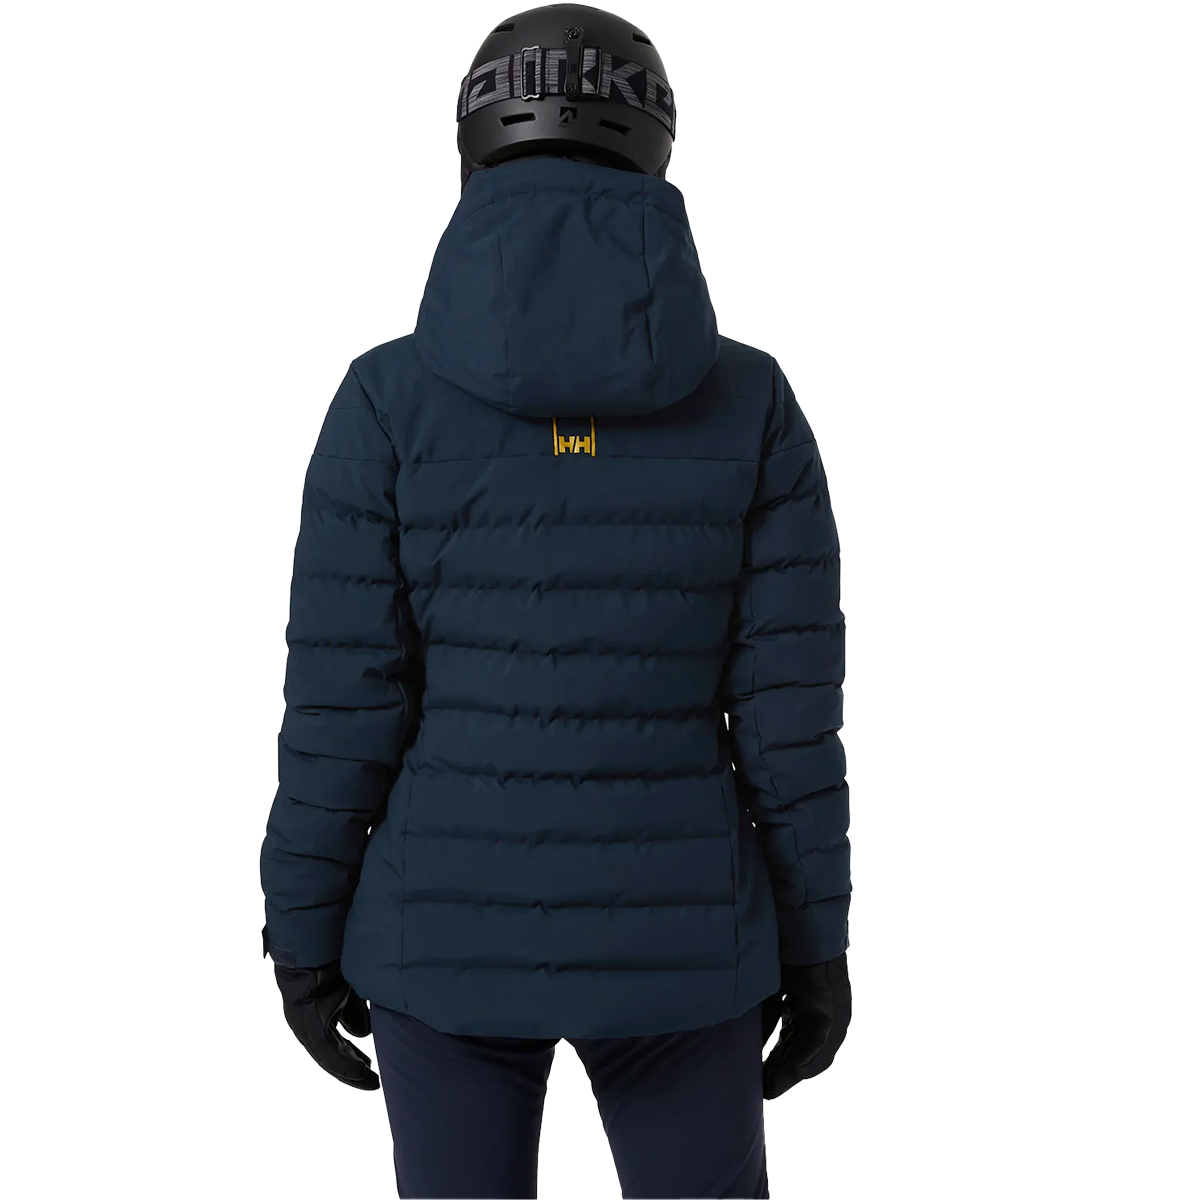 Women's Imperial Puffy Jacket alternate view